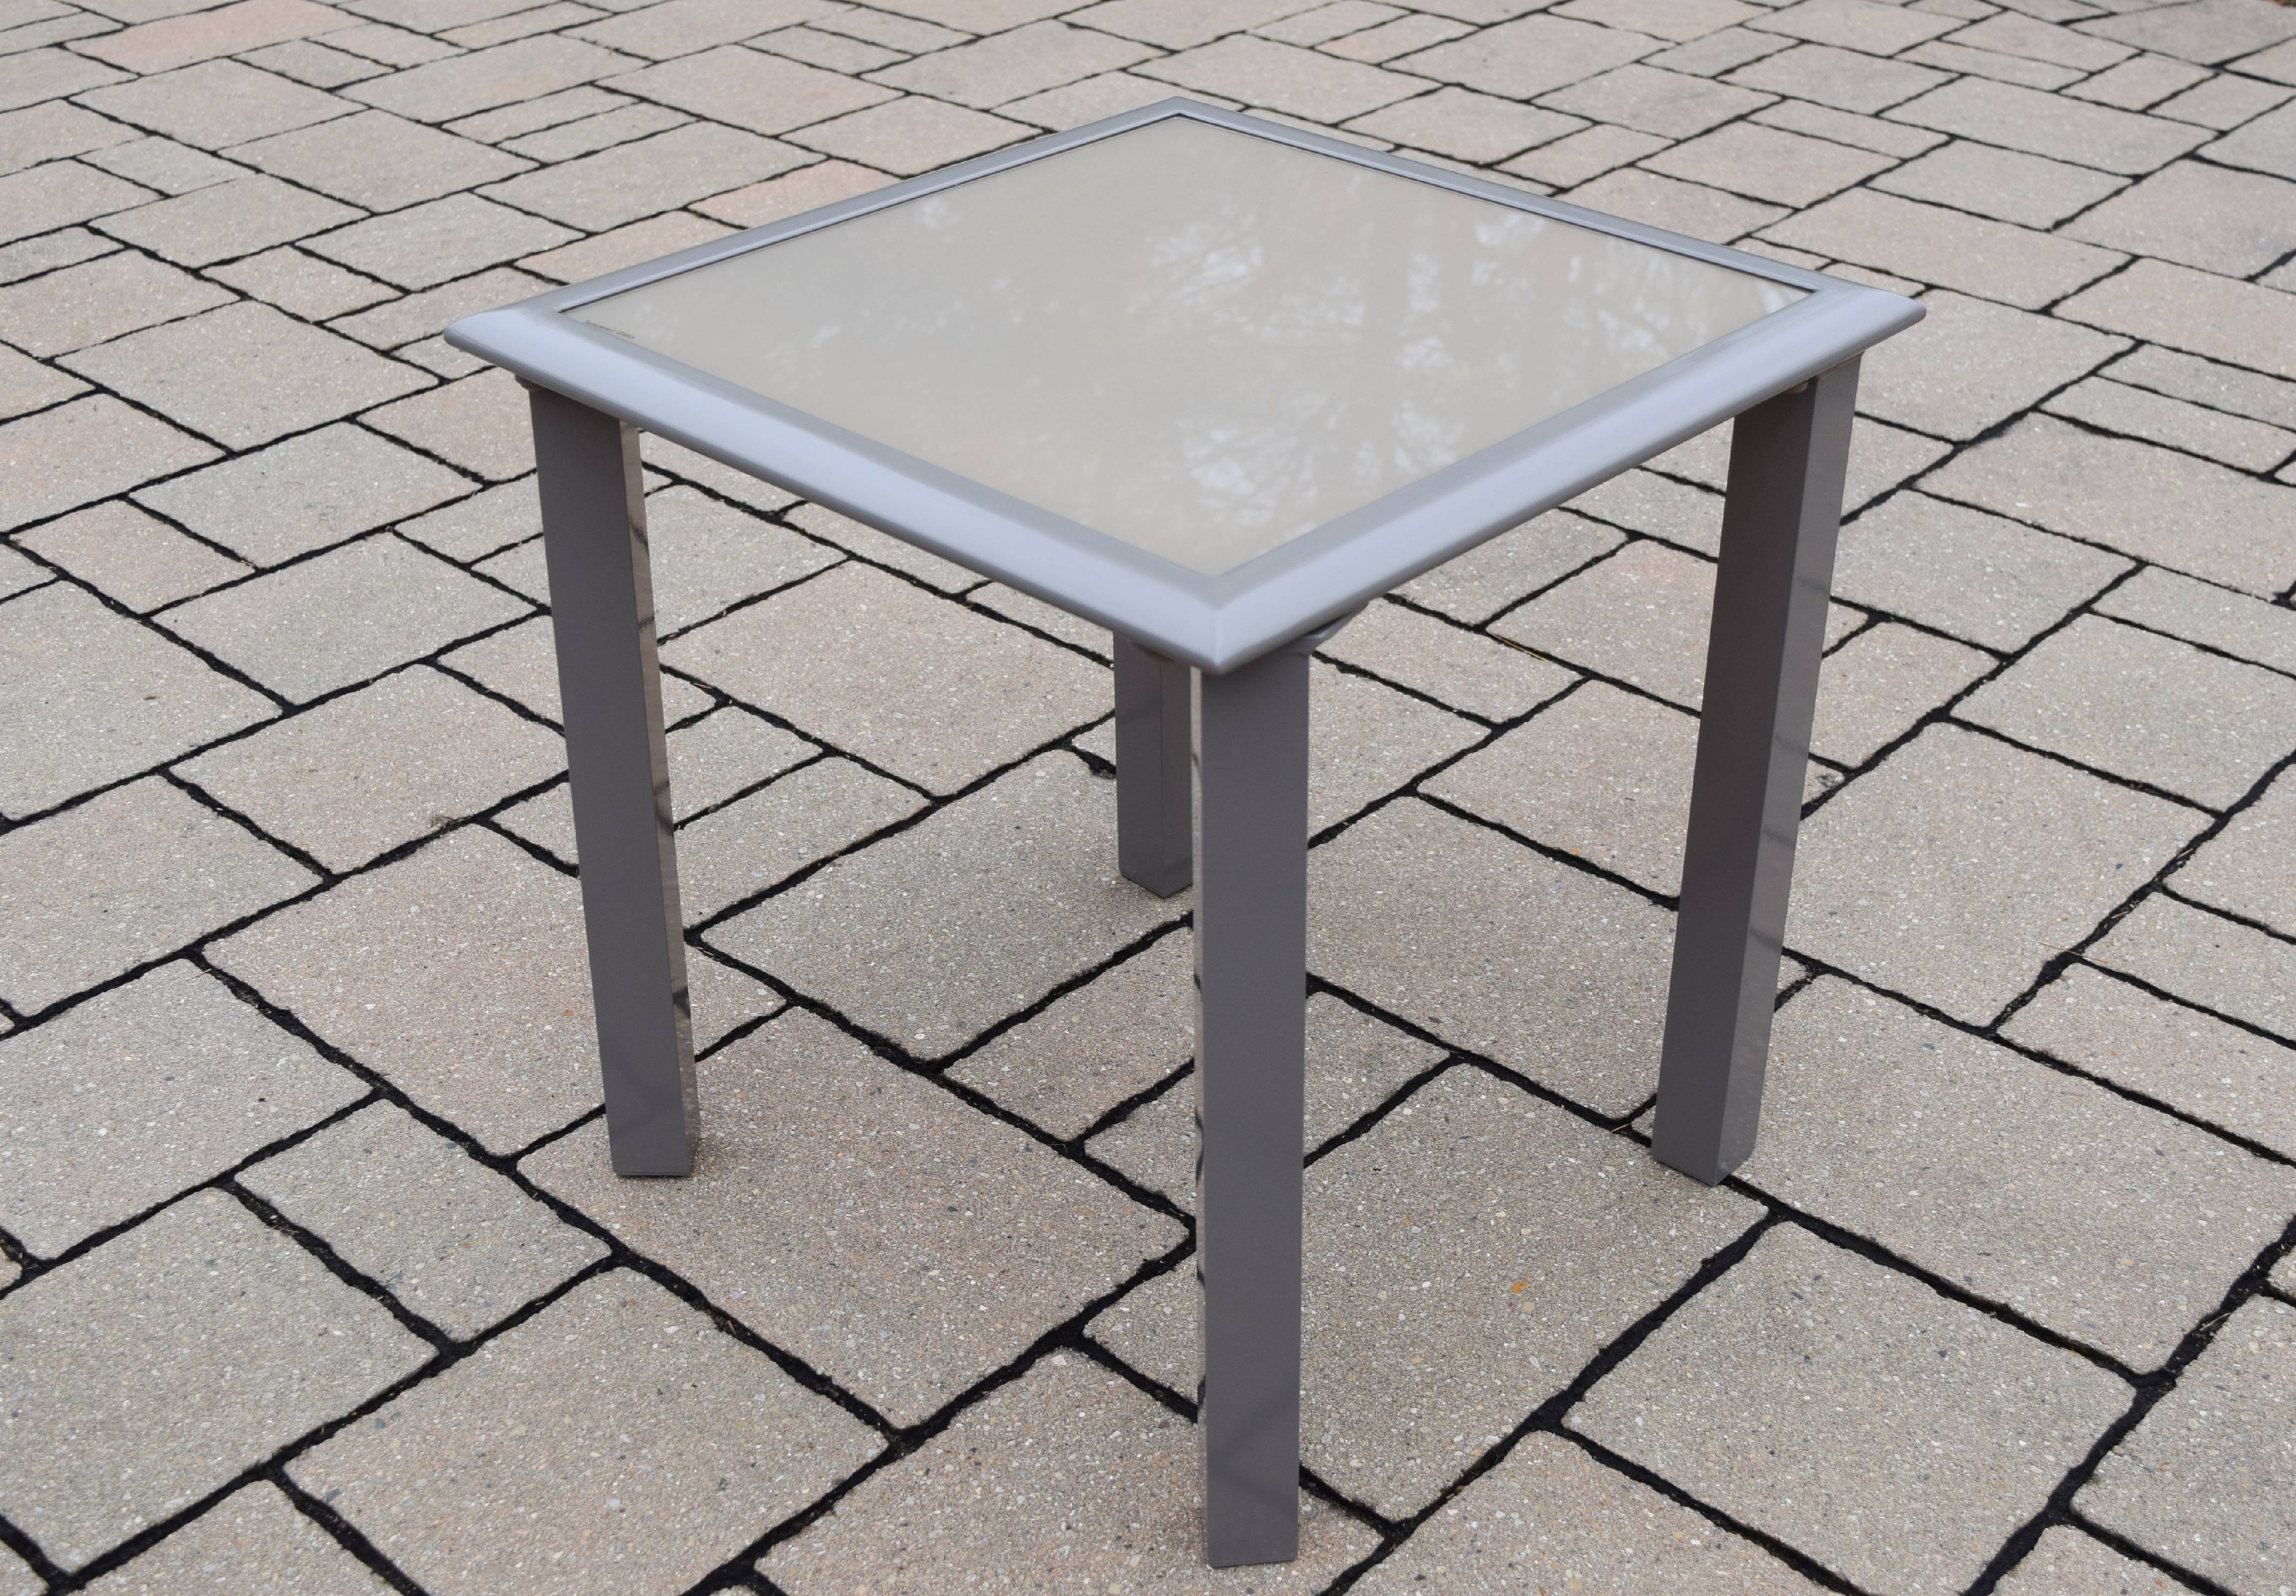 CC Outdoor Living 18" Sand Colored Outdoor Screen Printed Patio Glass Top Side Table - image 2 of 2